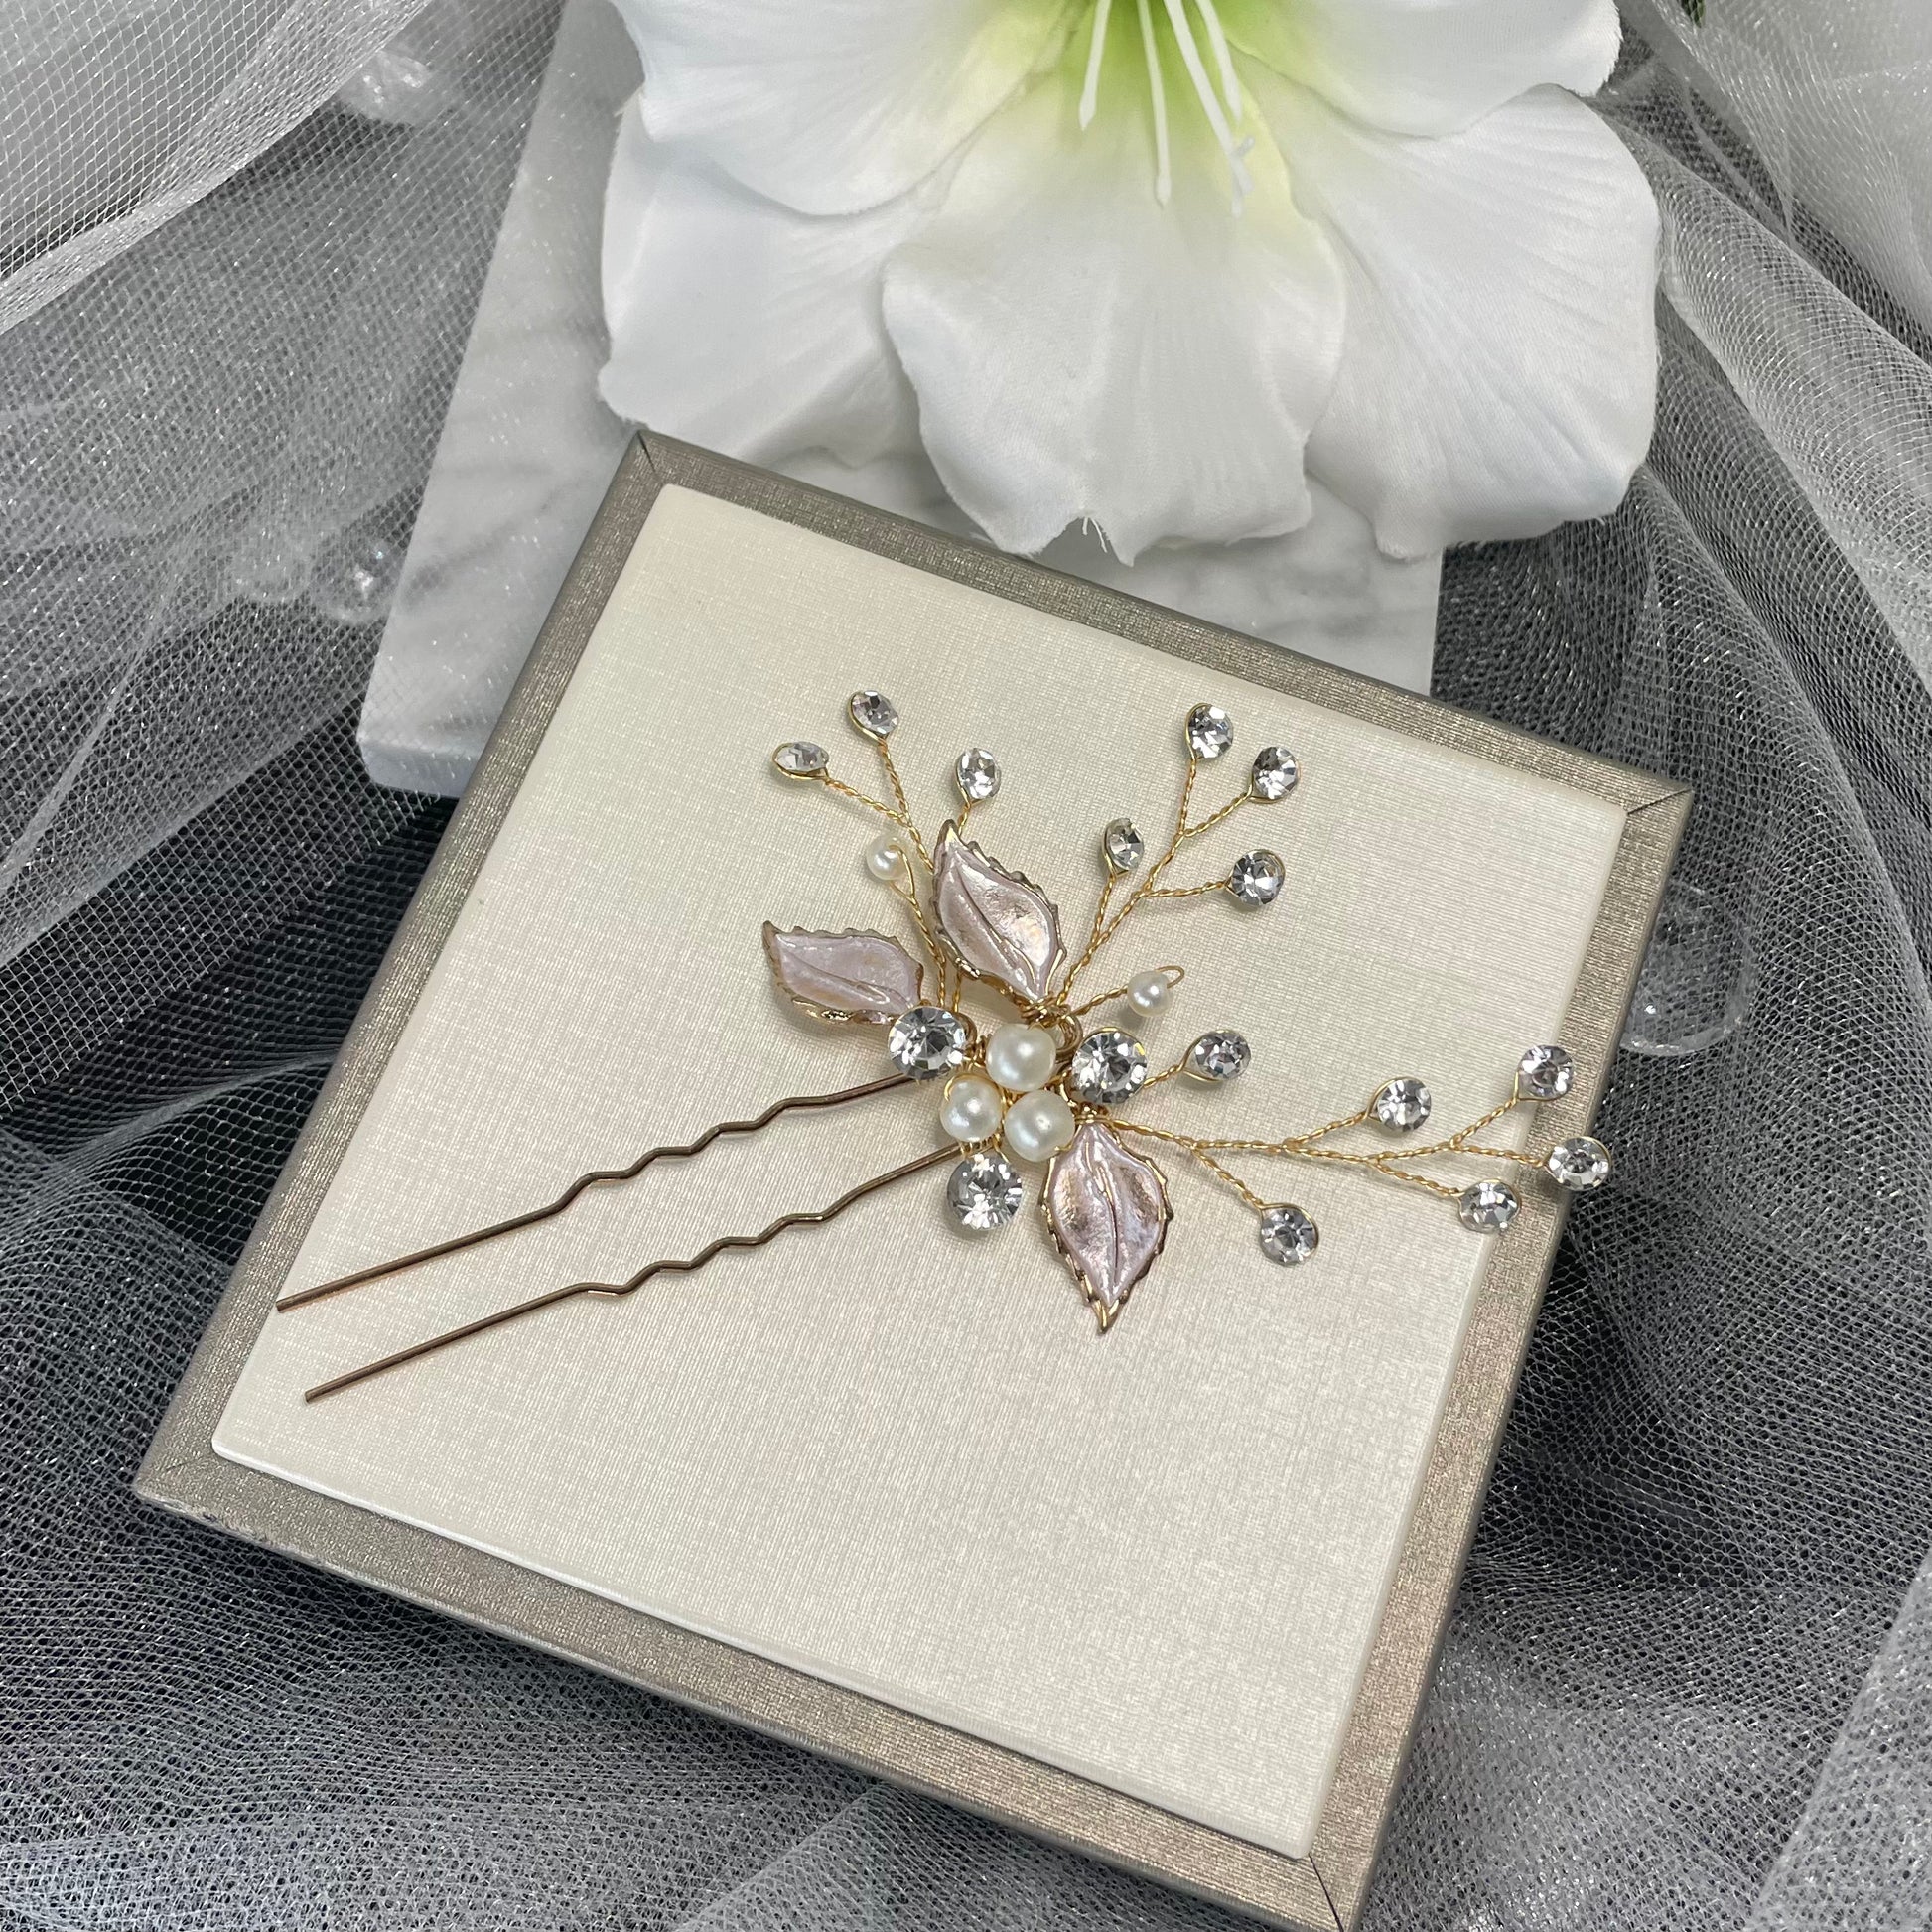 Stunning Megan Hairpin with three-leaf design, adorned with pearls and crystals, set on beautiful goldish and rosegold wire, perfect for adding elegance to wedding hairstyles.